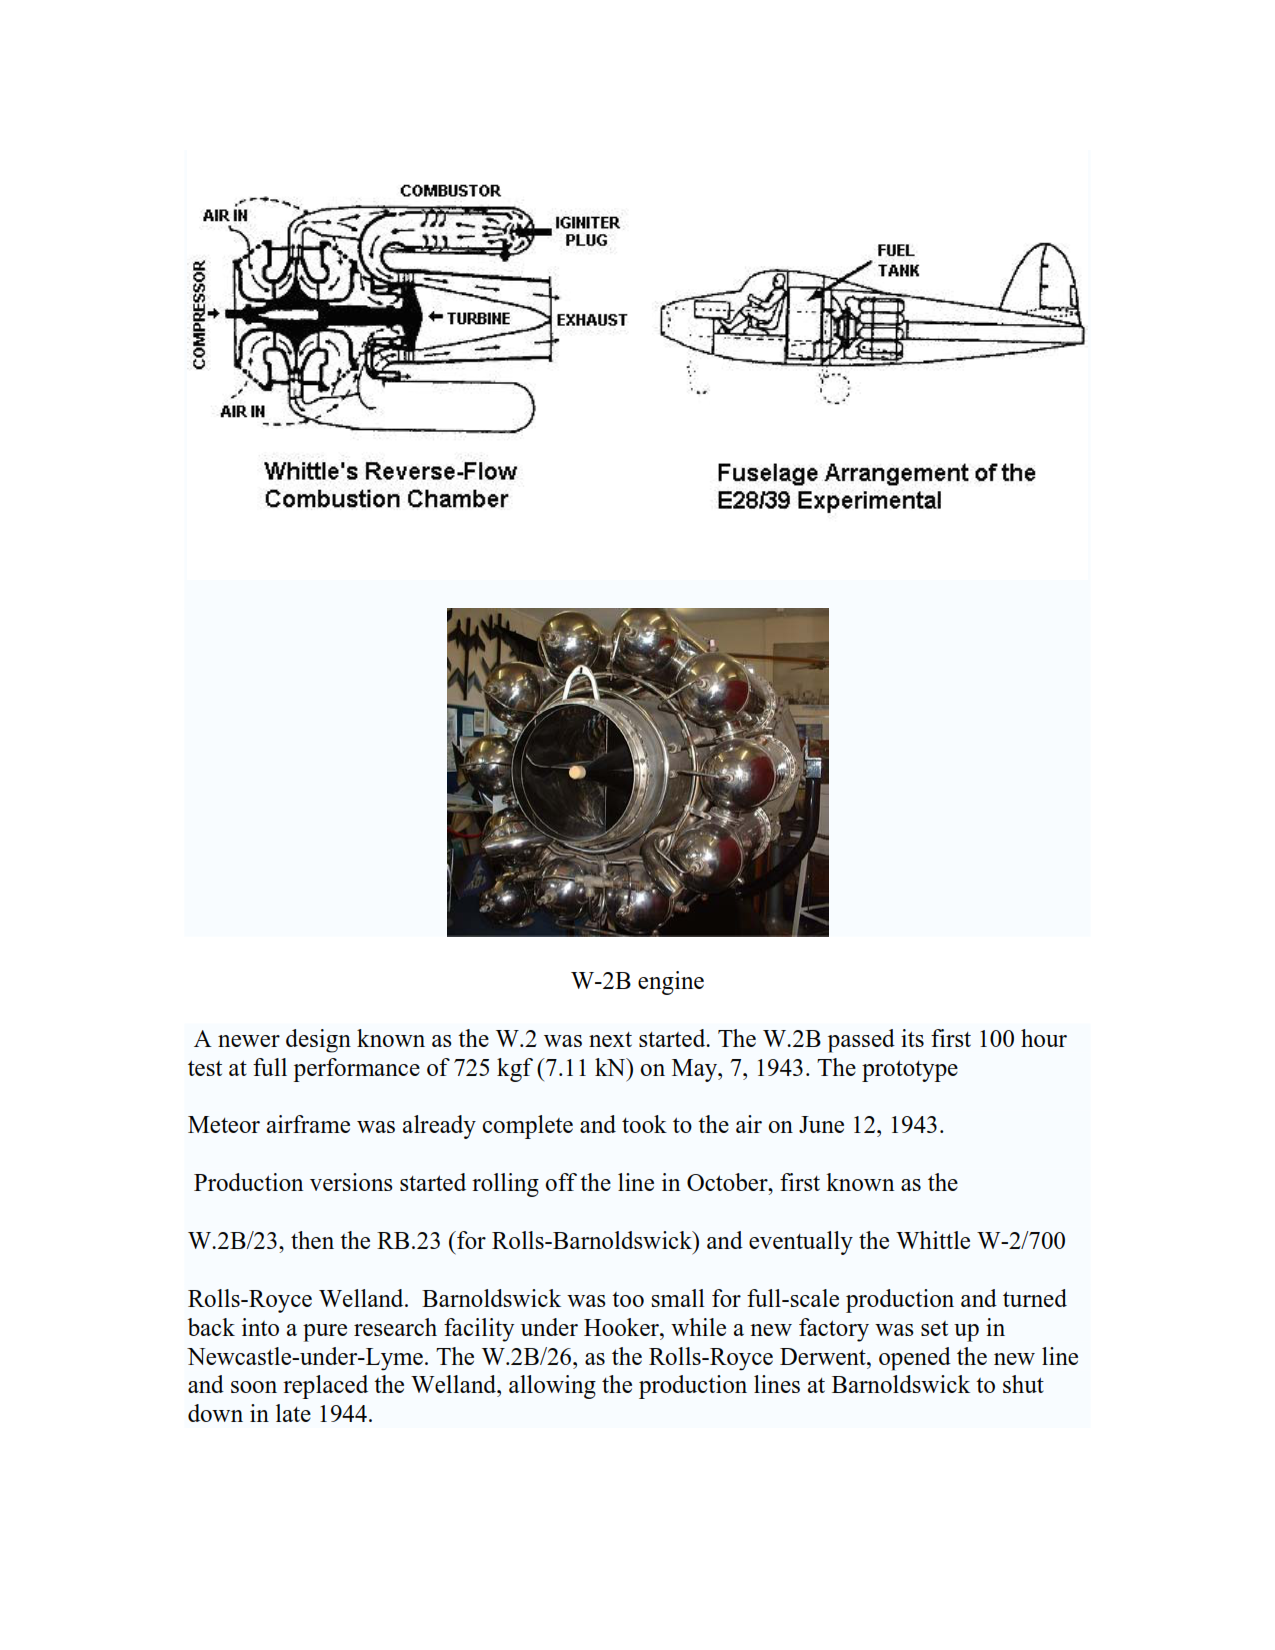 download free Aircraft Propulsion and Gas Turbine Engines Ahmed Sayed 1st edition solution manual pdf | Gioumeh solutions